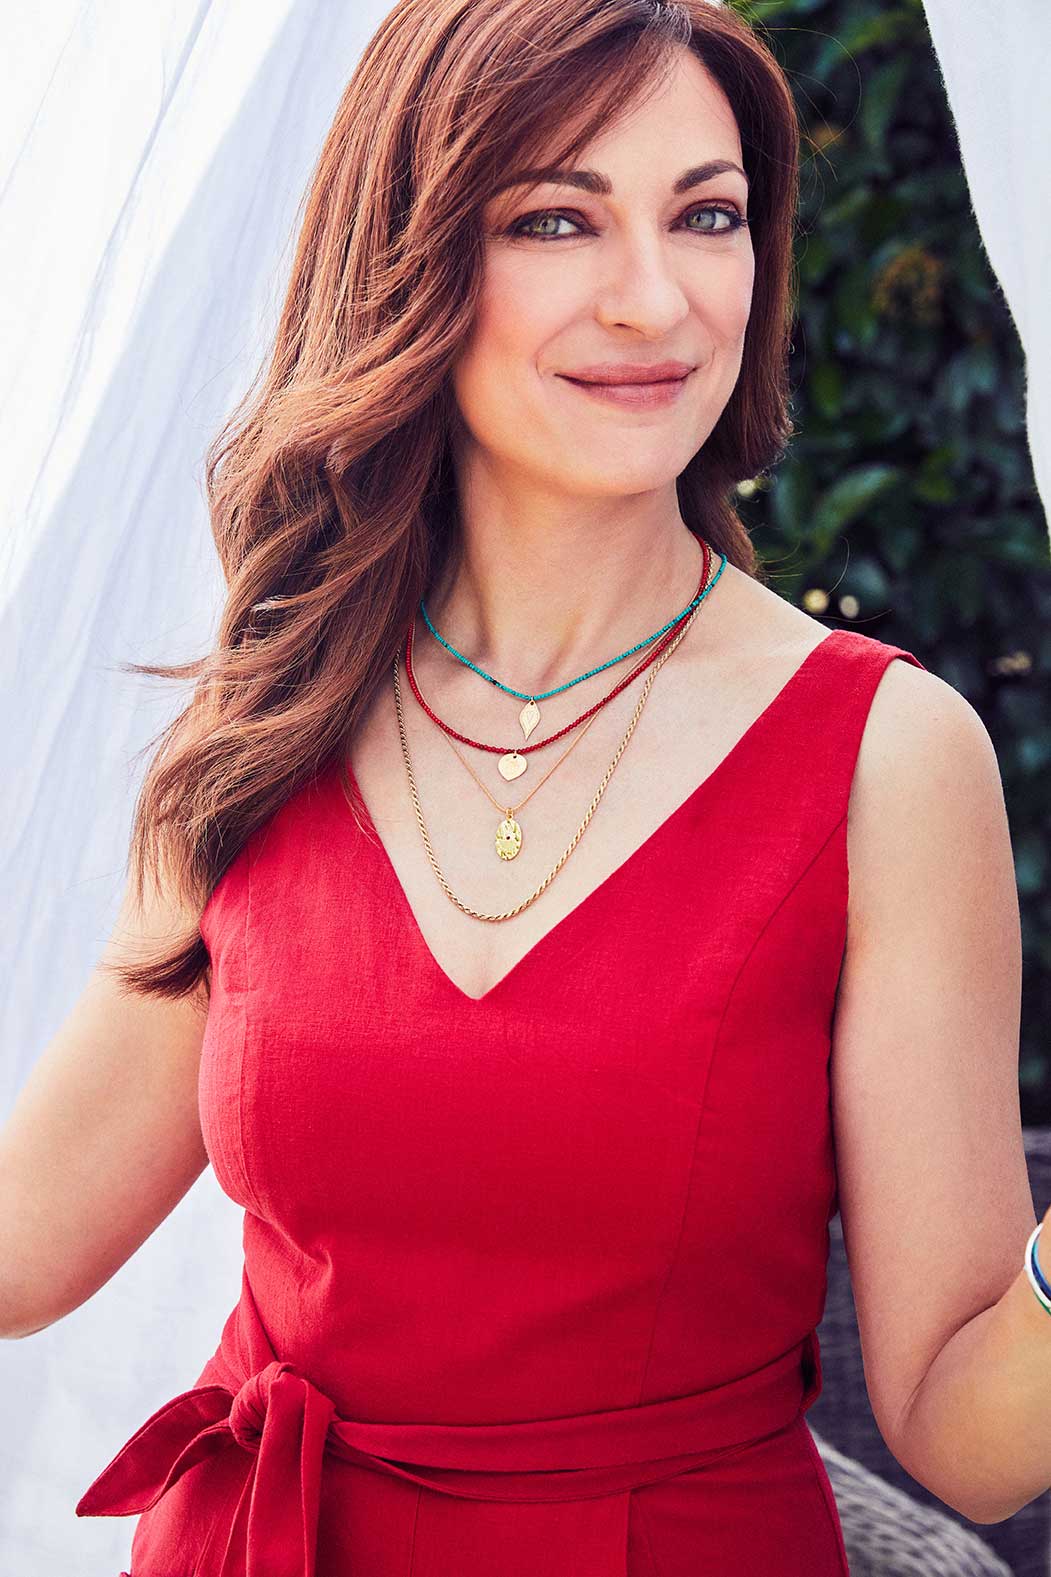 Emily Koliandri is feeling very happy wearing a combo of 4 different necklaces with germstones, silver 925 gold plated chain and silver 925 gold plated charms.